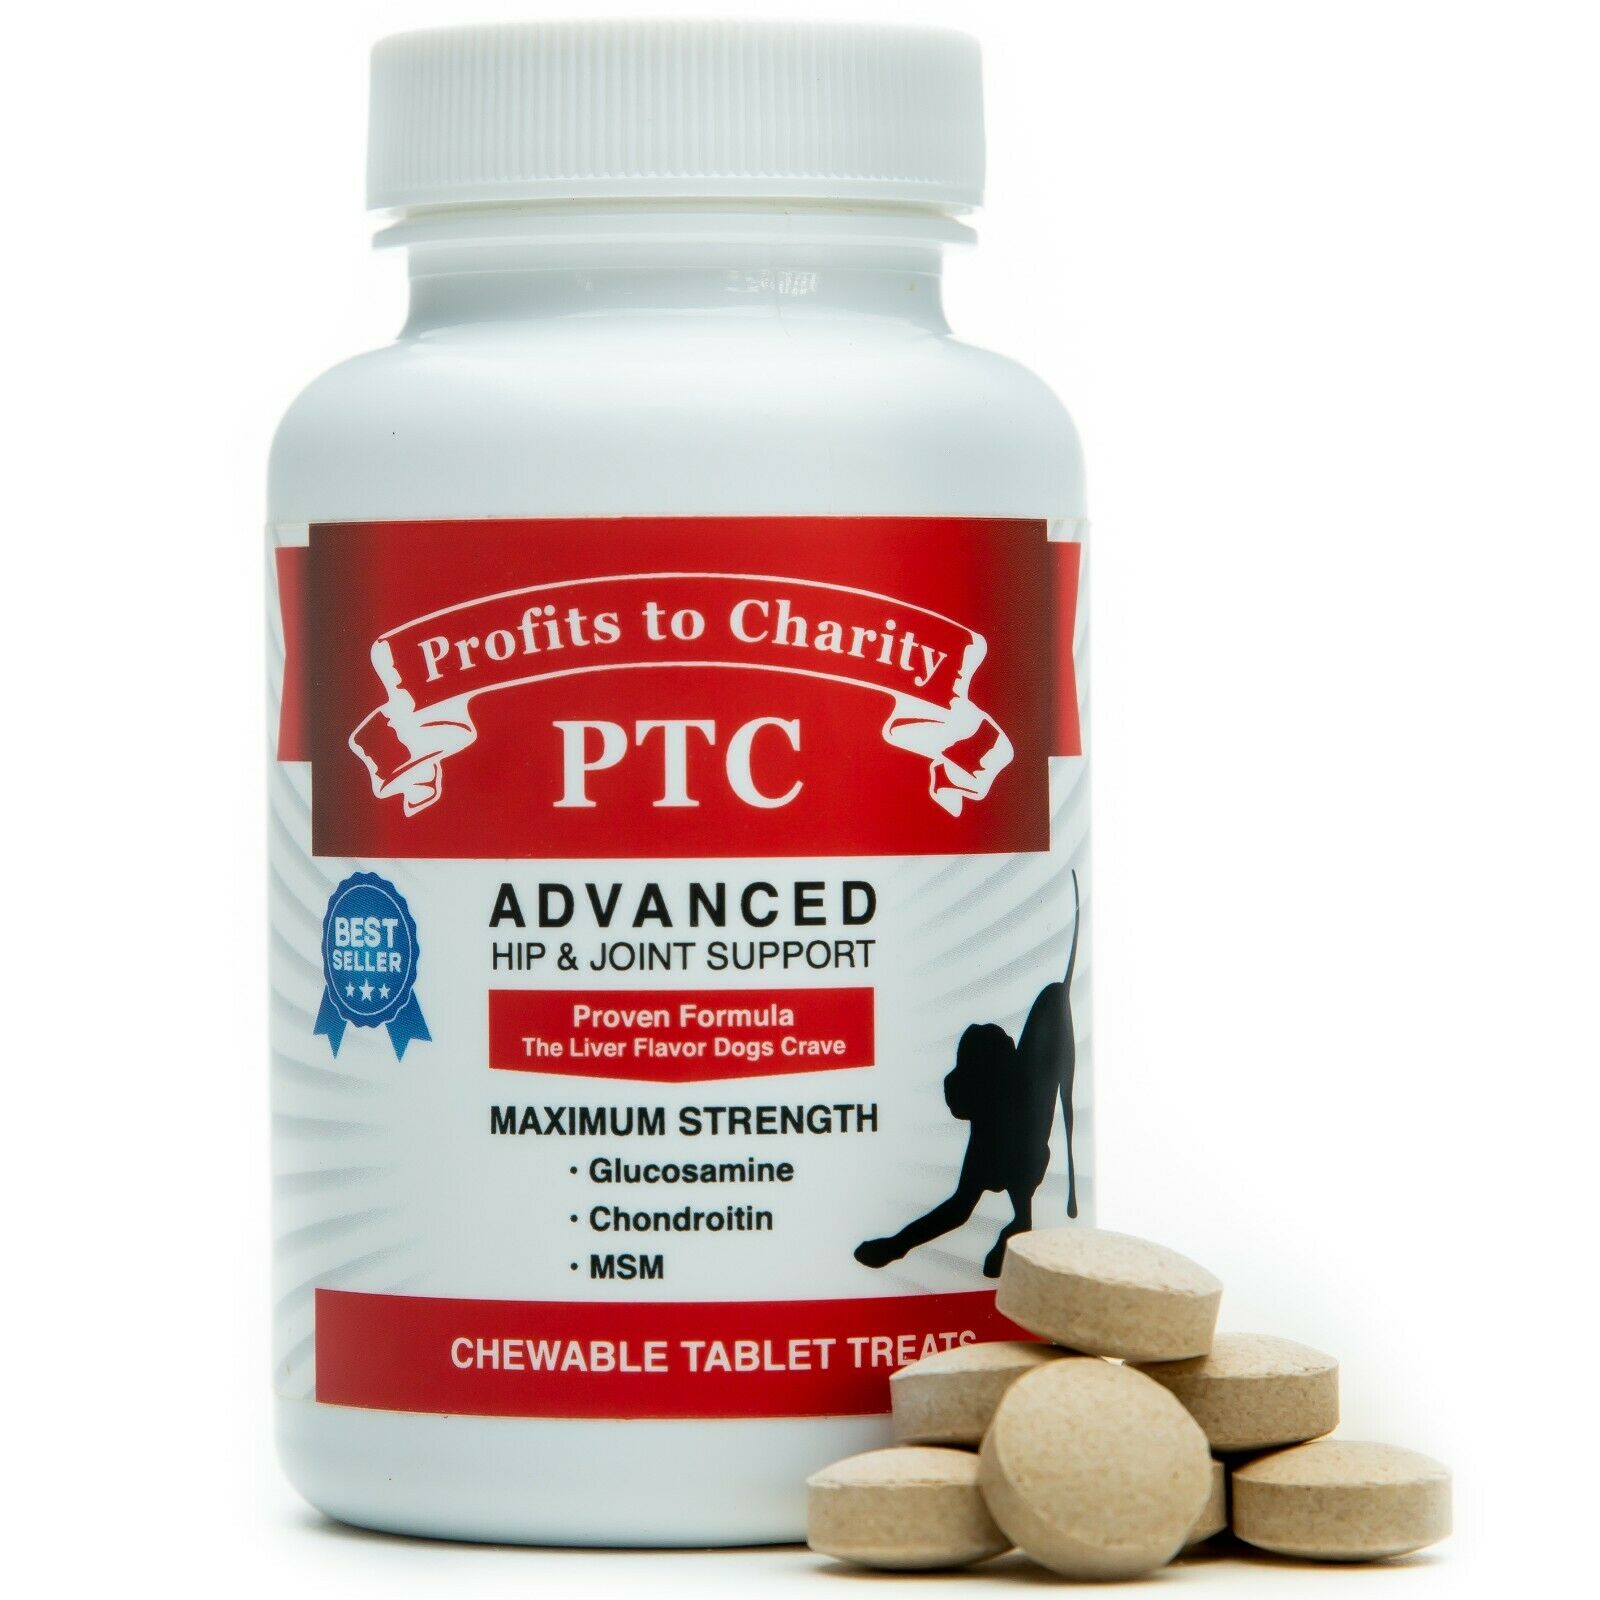 Hip And Joint Support, Glucosamine Chondroitin Msm For Dogs,